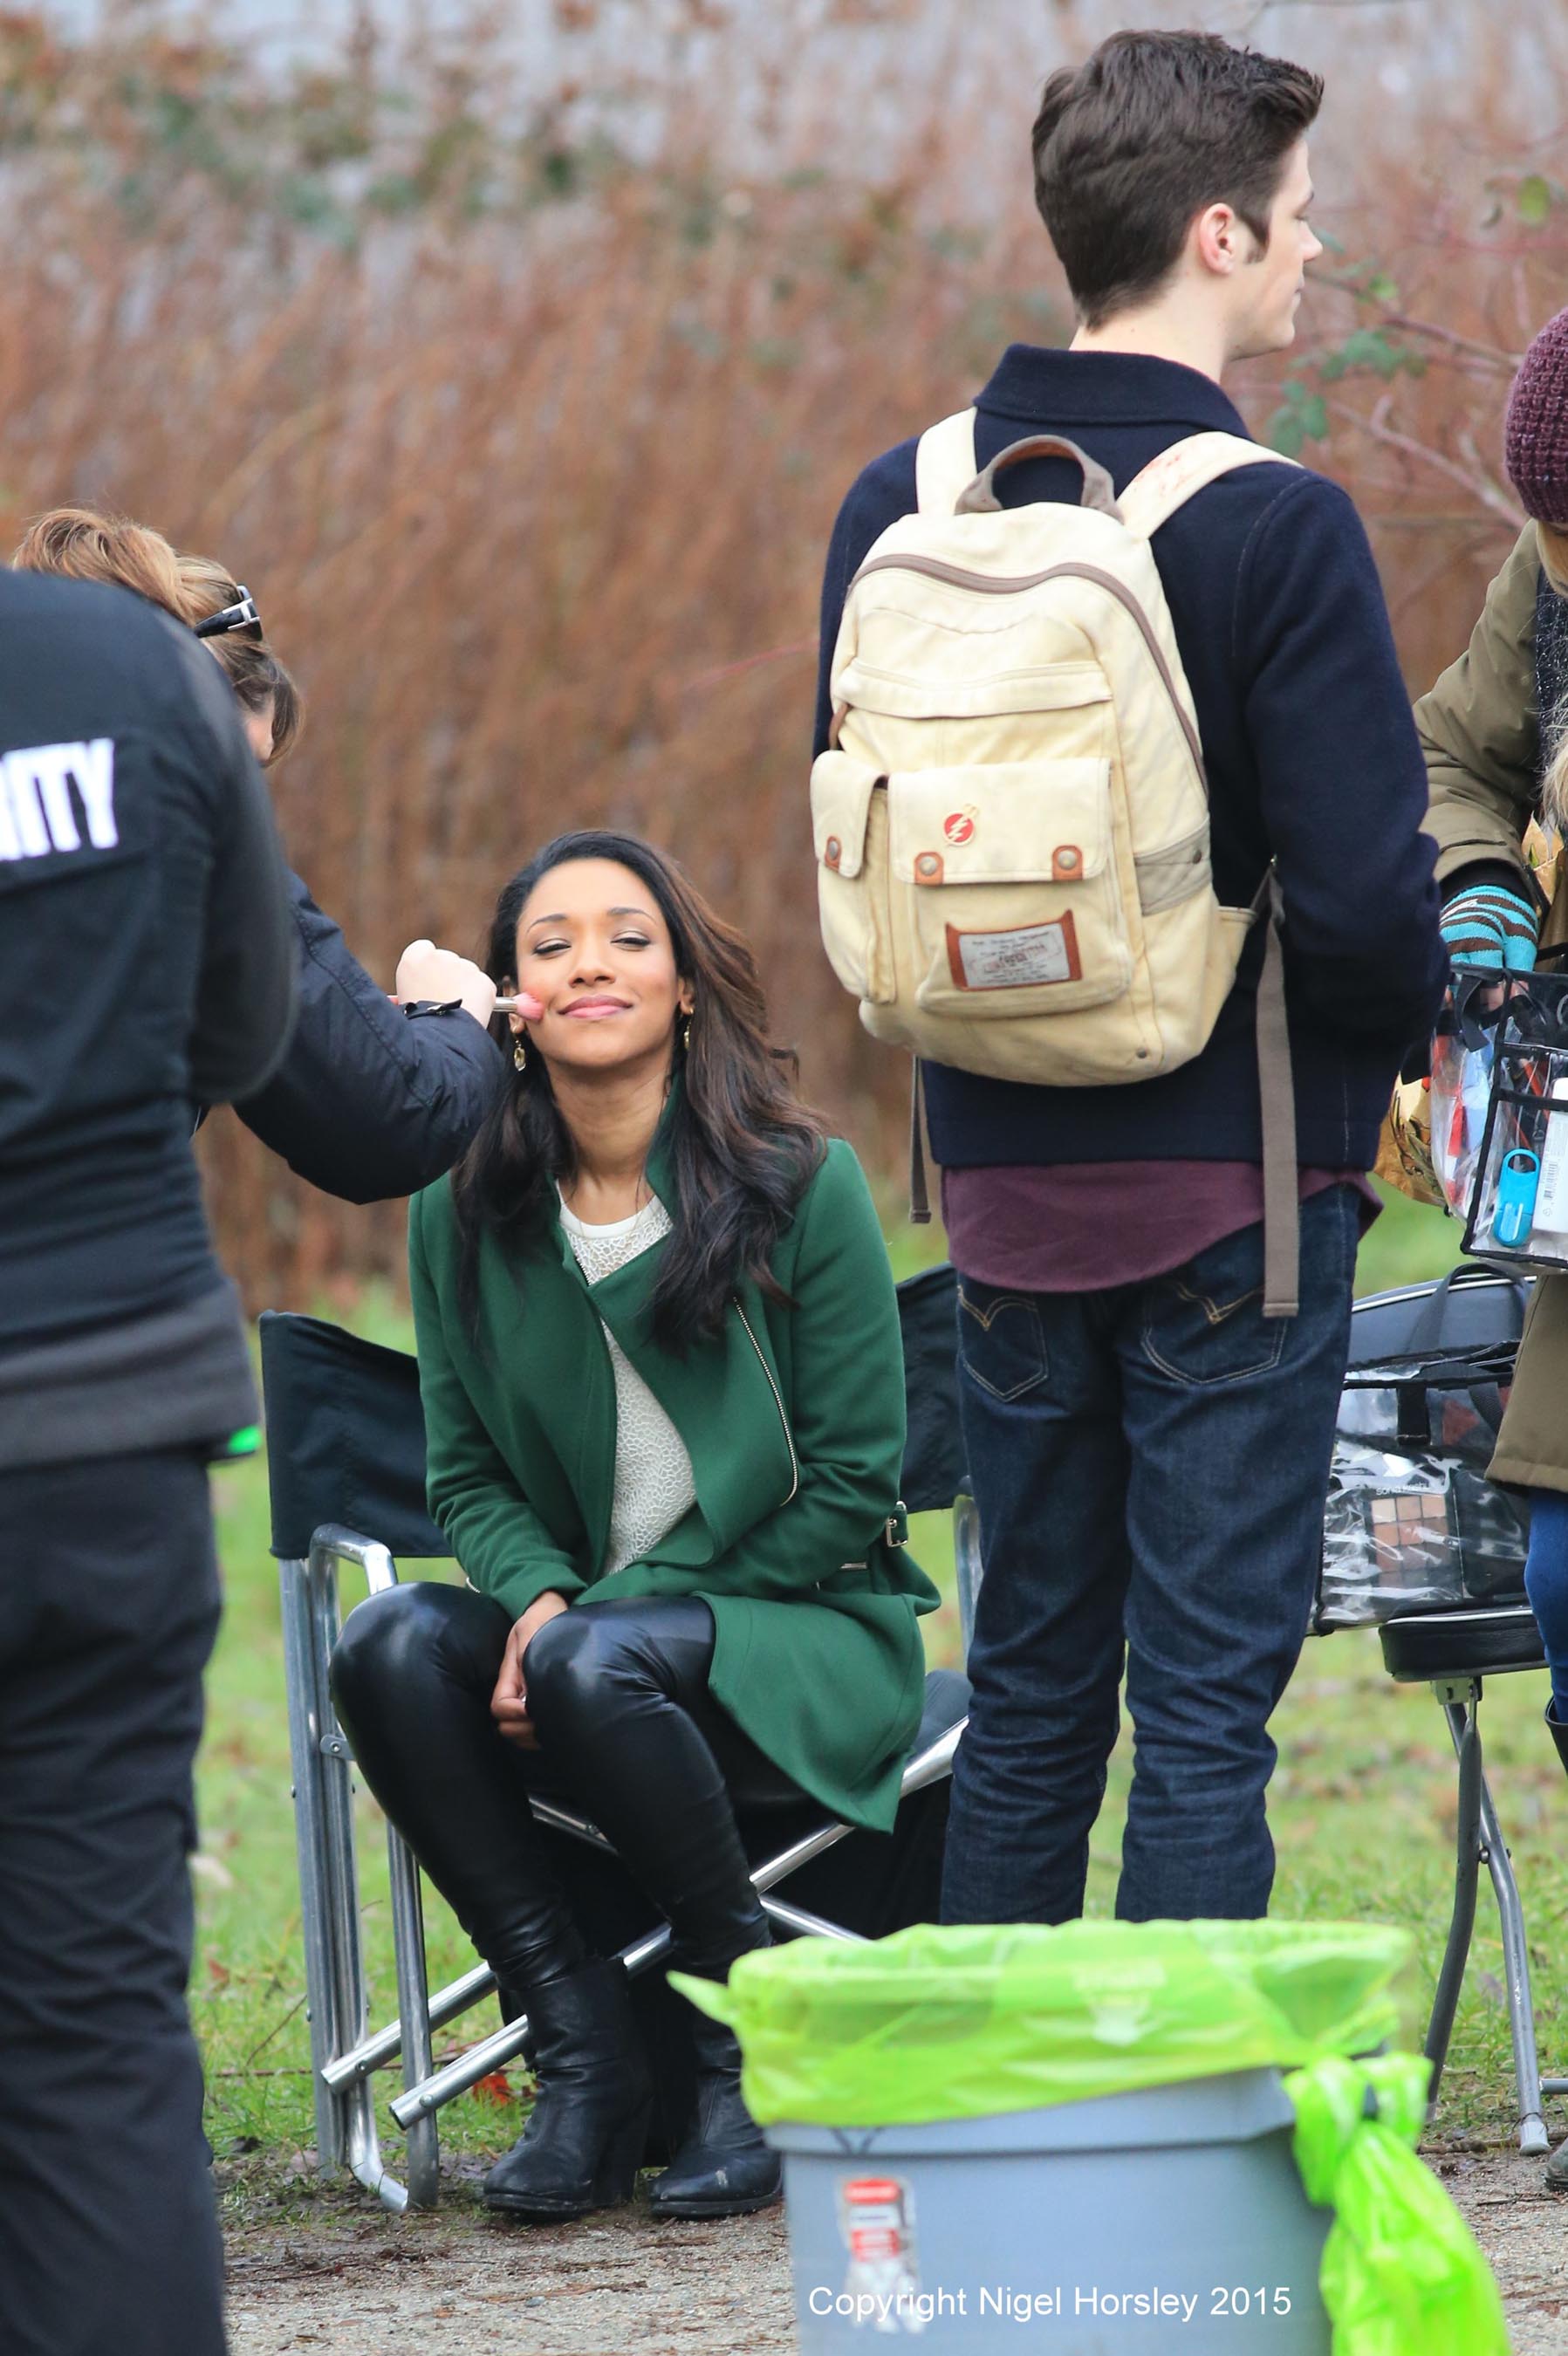 Candice Patton on the set of The Flash